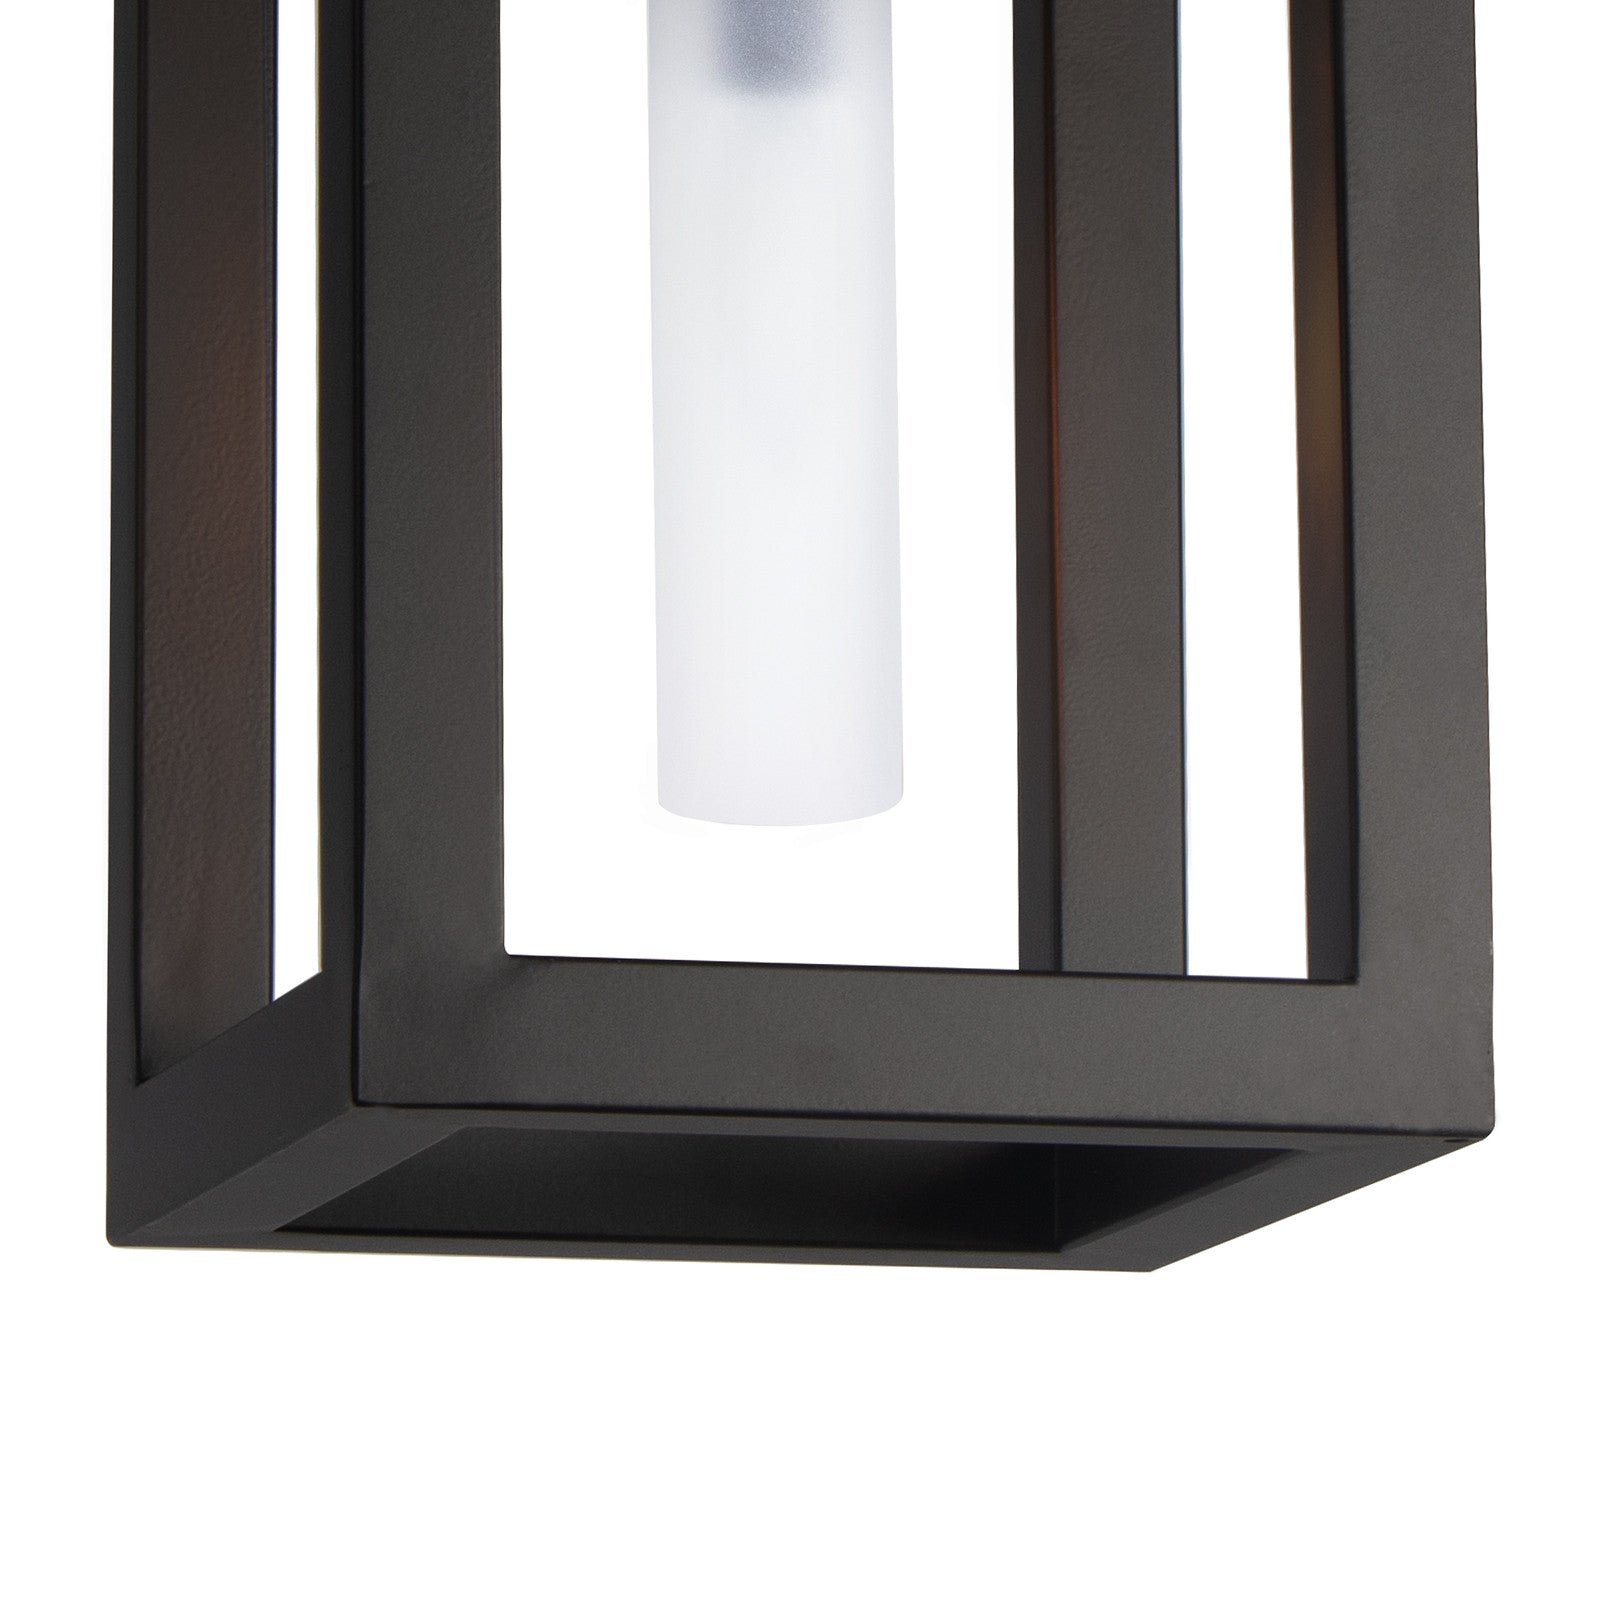 This bold Montecito Outdoor Lantern - Small showcases the architecturally inspired lines of Montecito, California's Spanish Colonial estates. The charcoal frame and frosted glass light cover provide a beautiful diffused glow -- the perfect addition to your outdoor lighting-scape or inside area.   Dimensions: 17.5"h x 9"d x 9"d